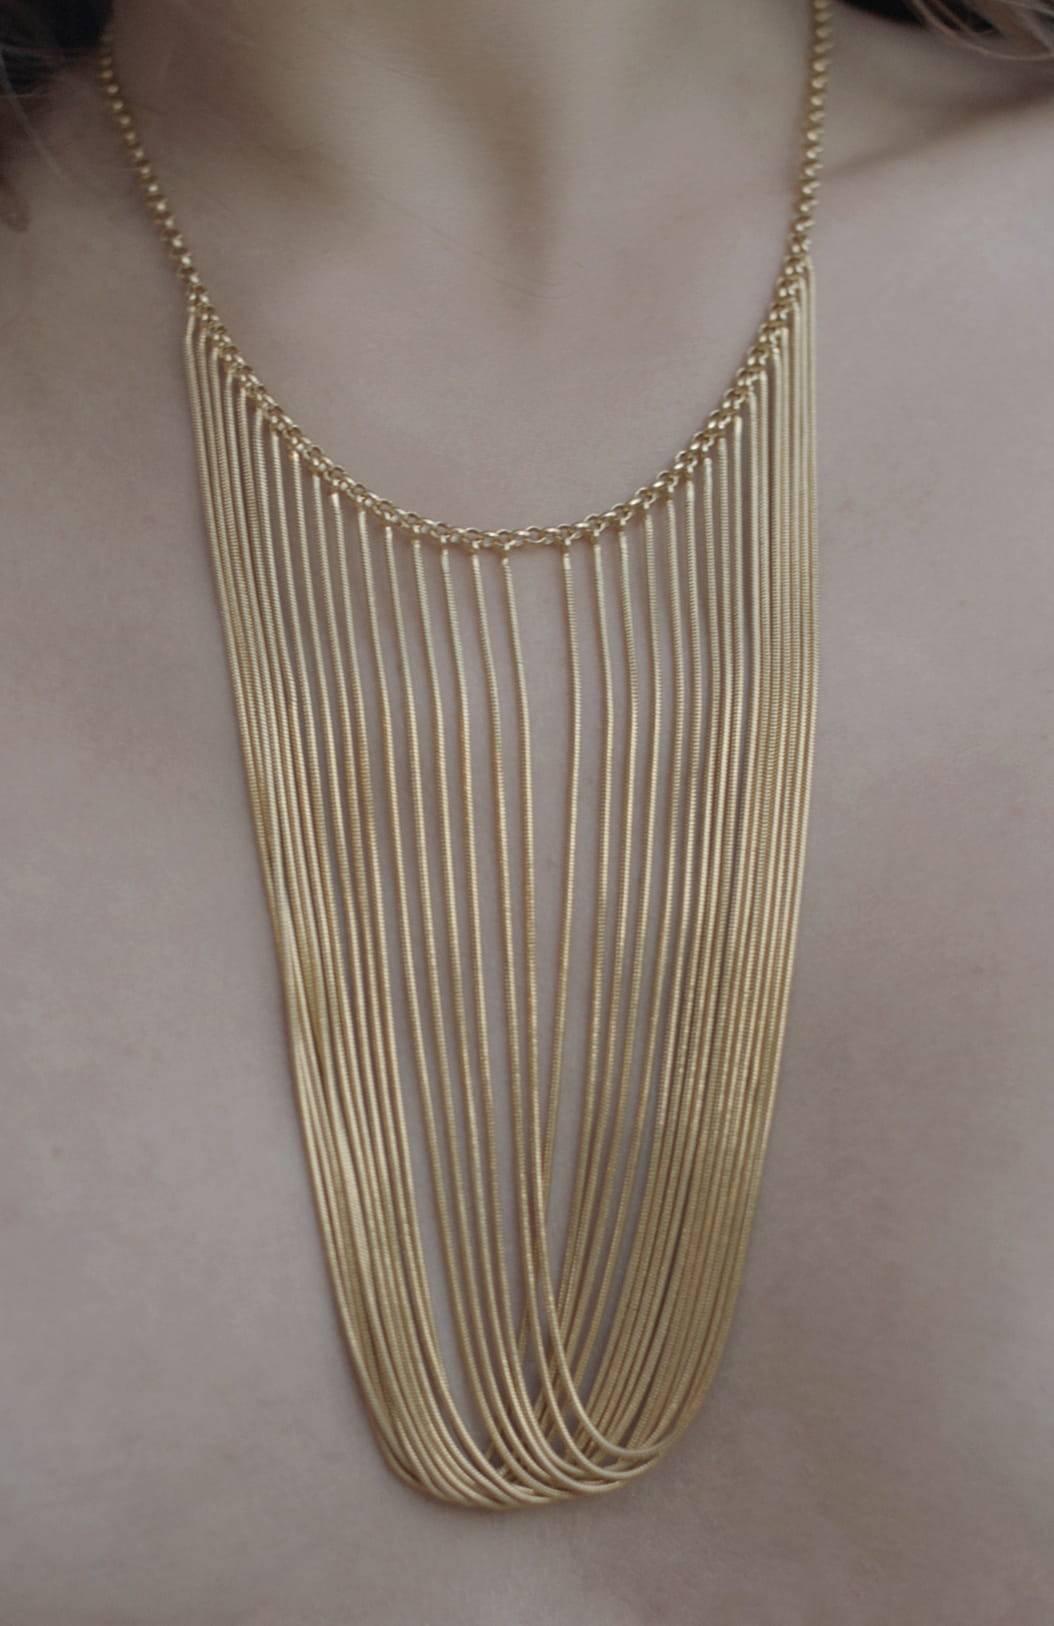 Necklace Statement Multi Snake Chain Gold-Plated Brass Greek Jewelry For Sale 2